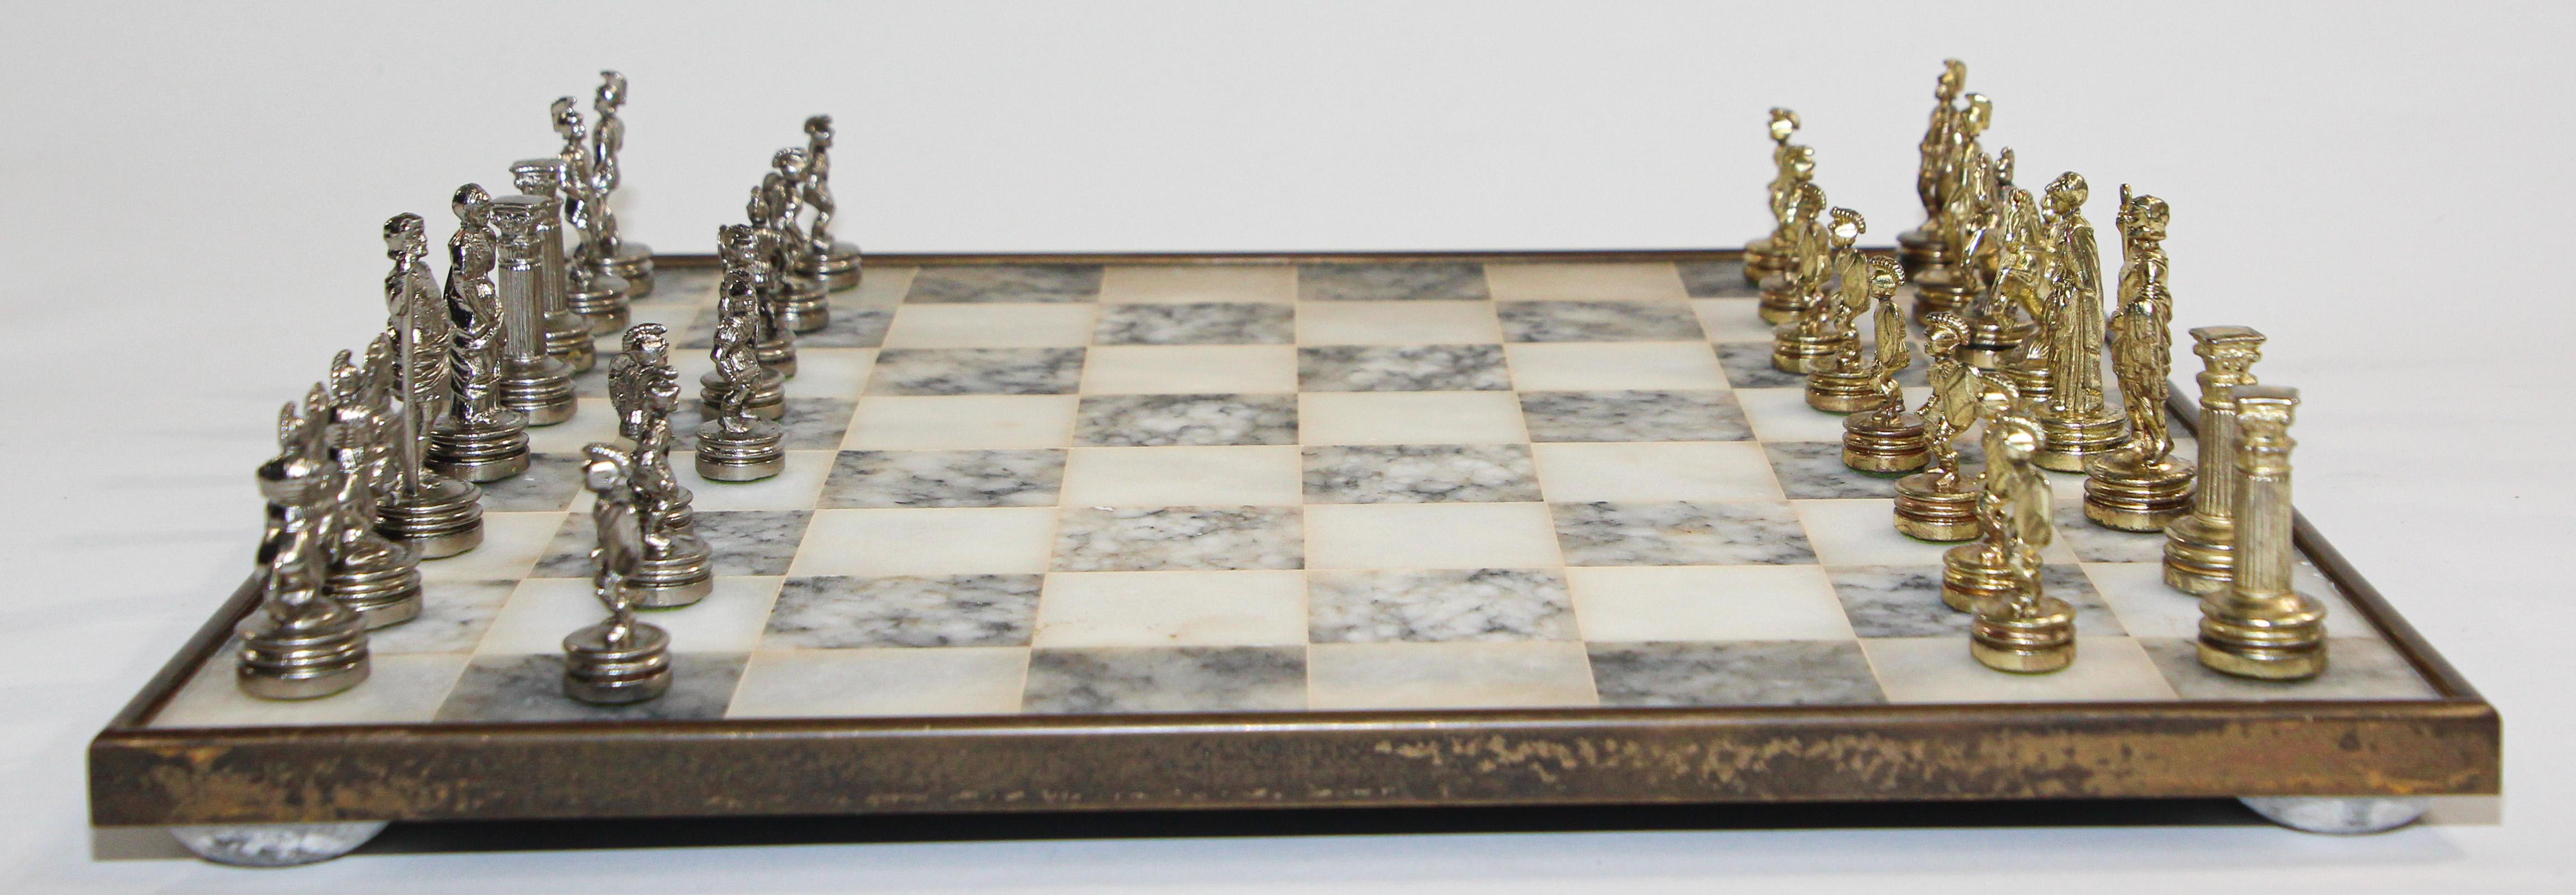 Stone Vintage Marble Chess Board with Metal Greek against Roman Chess Pieces